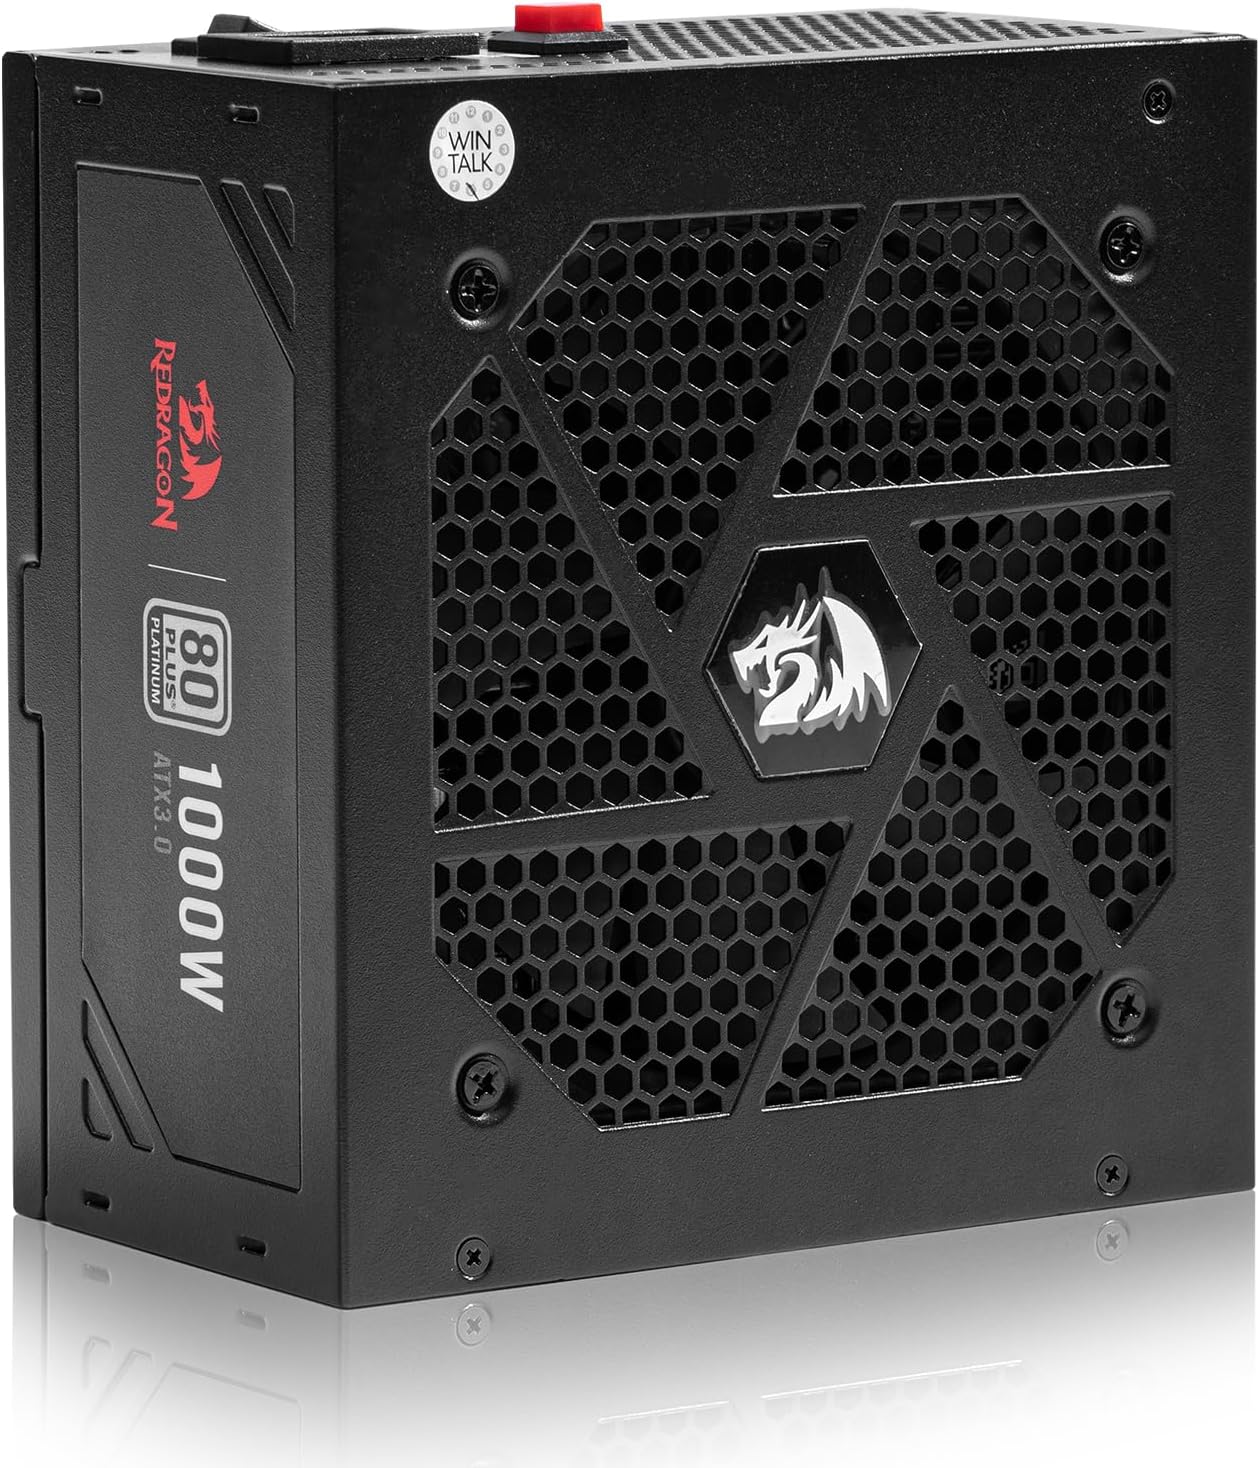 Redragon PS017 80+ Platium 1000 Watt ATX Fully Modular Power Supply, 80 Plus Certified, 100% Japanese Capacitors & Low Noise Smart-ECO 0 RPM Fan, Full Mod Cables w/12VHPWR Cable, Black